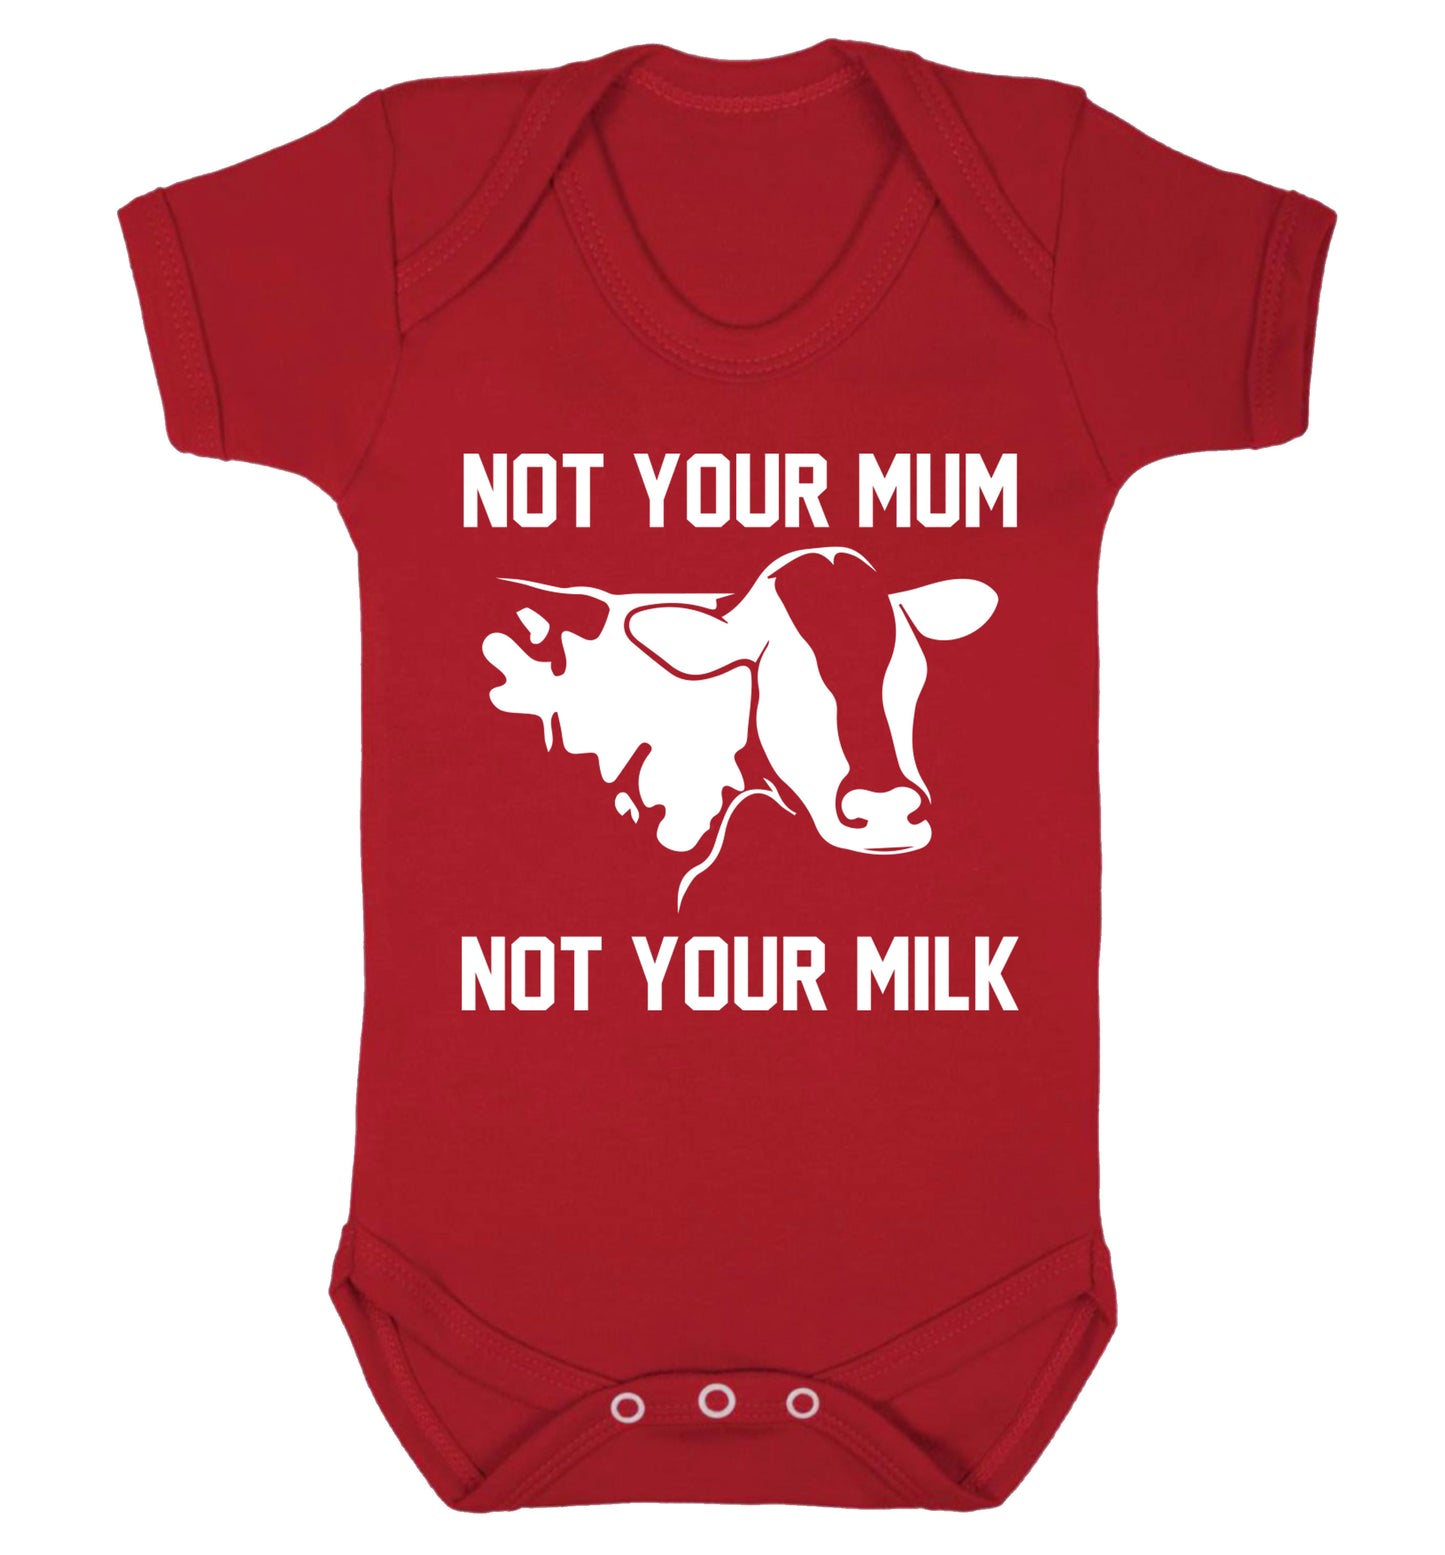 Not your mum not your milk Baby Vest red 18-24 months